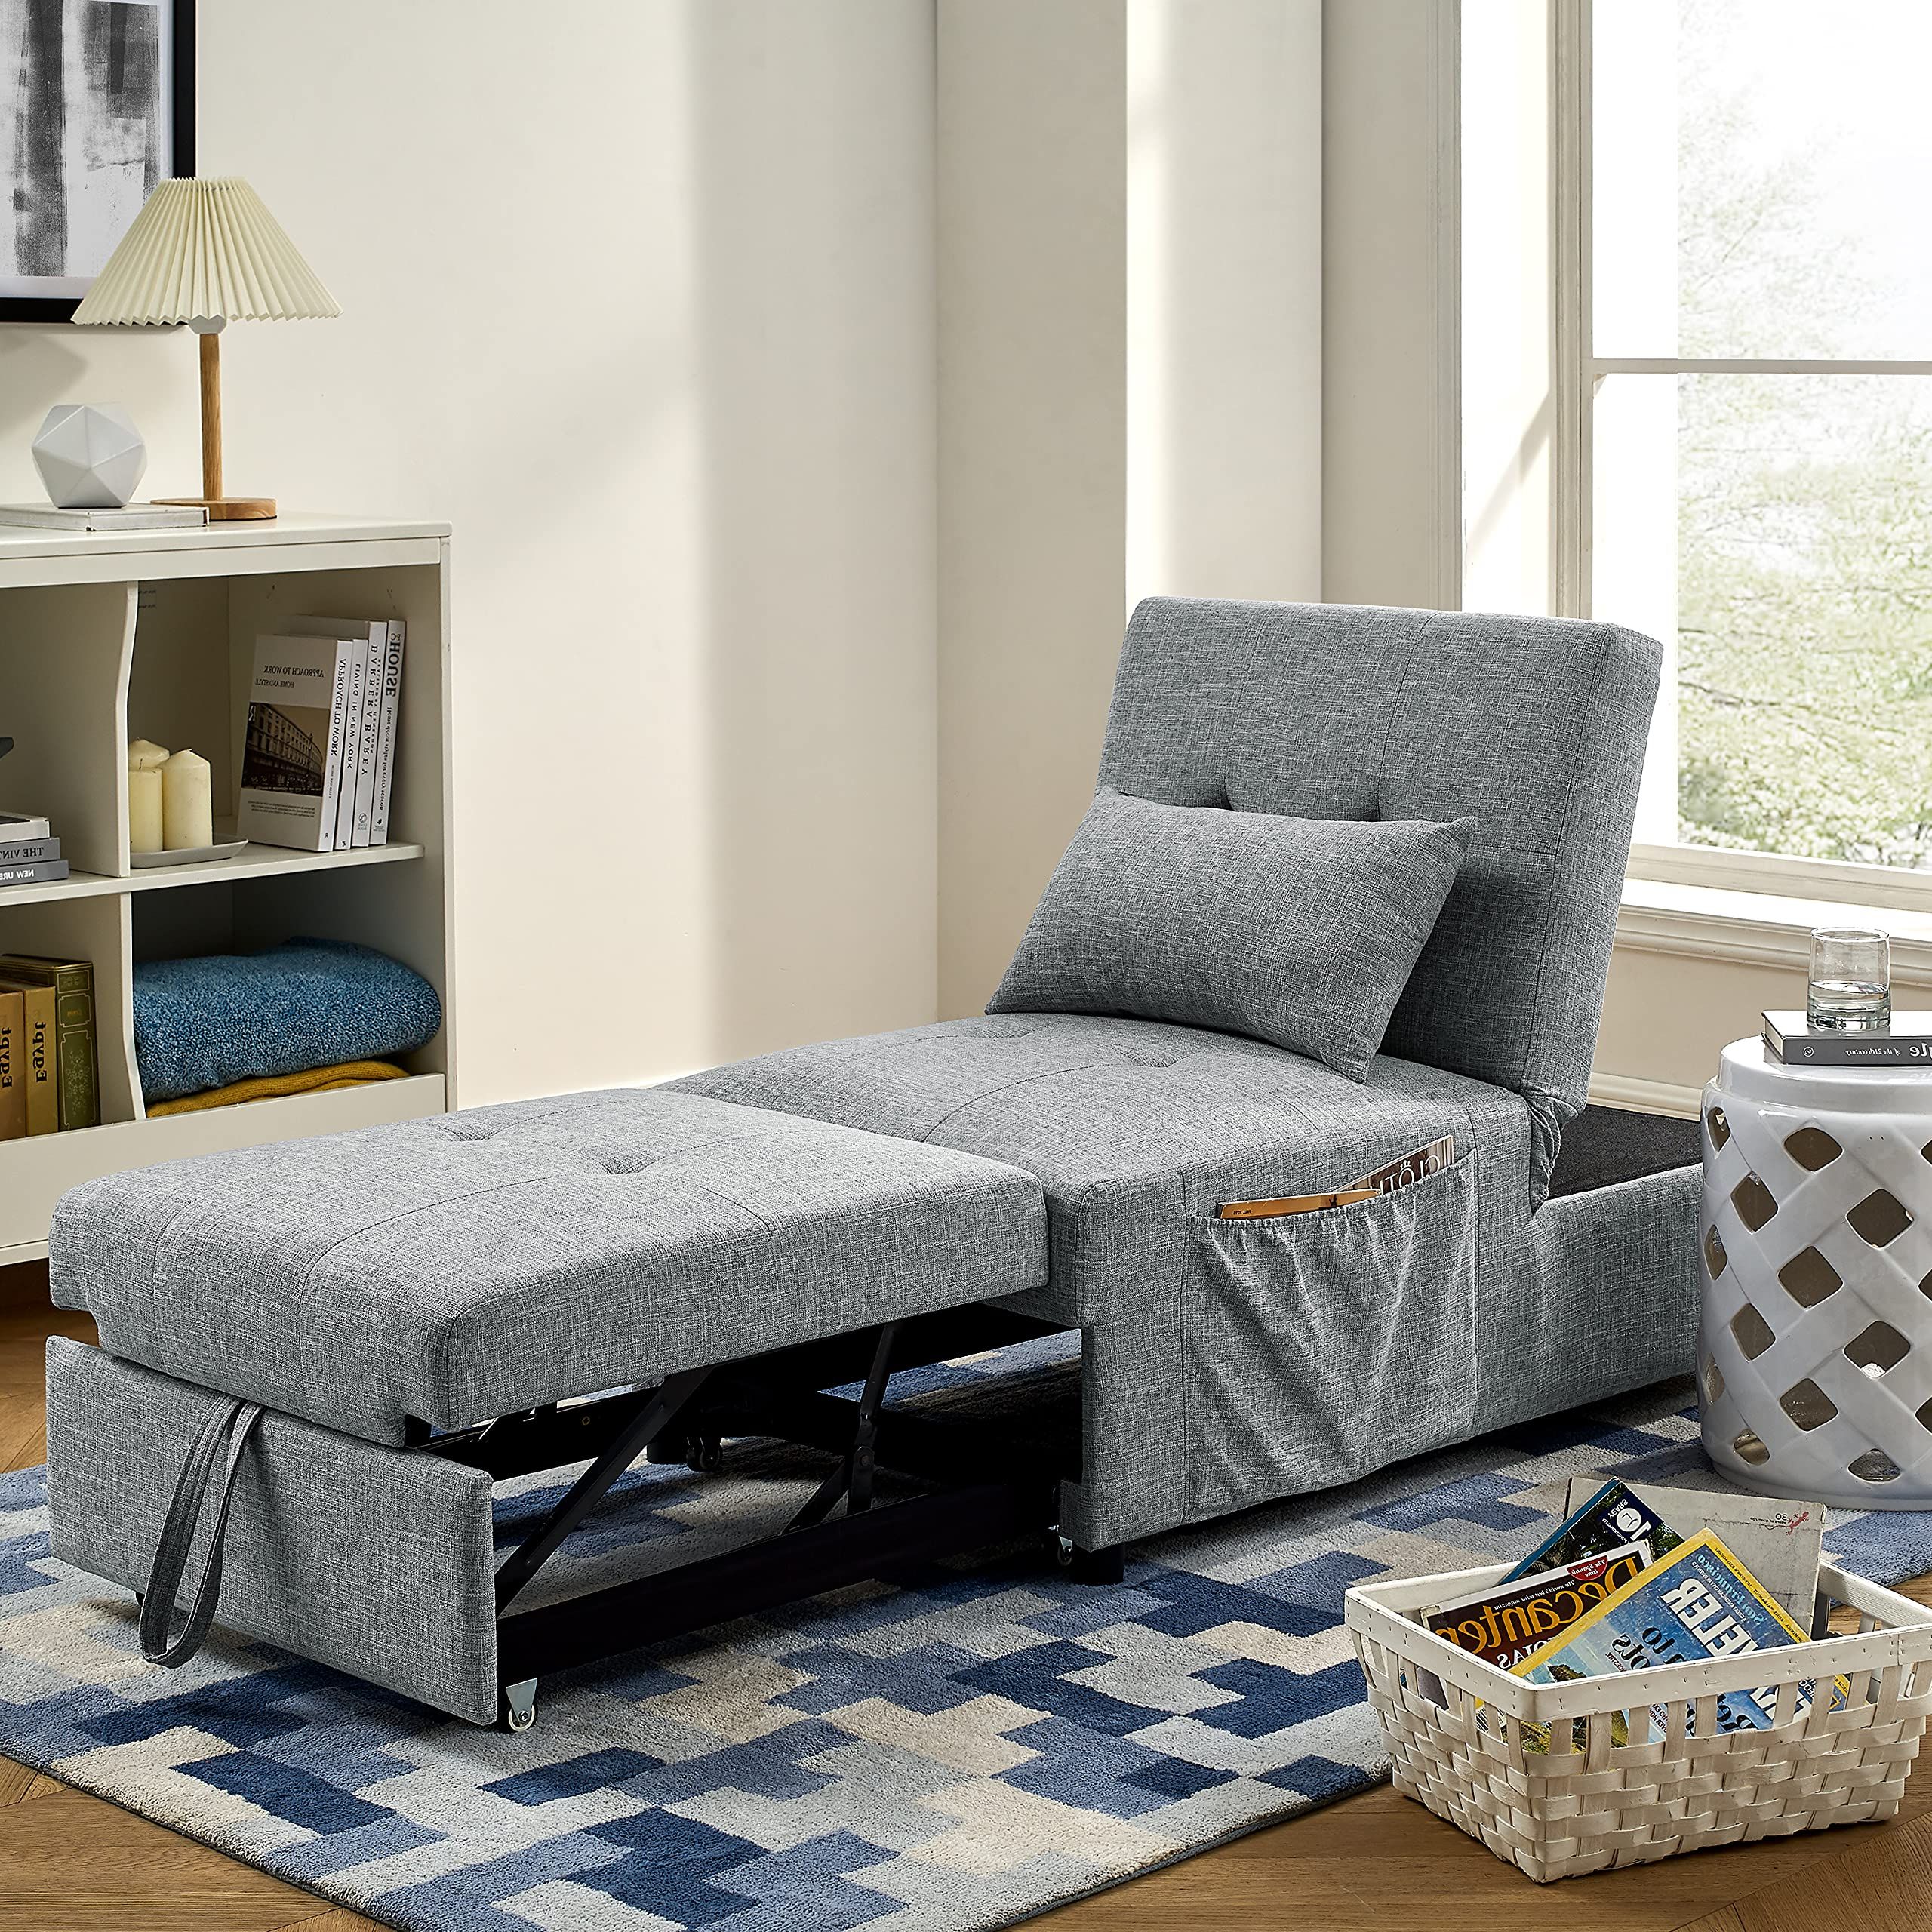 Most Popular 4 In 1 Convertible Sofa Bed, Folding Ottoman Sleeper Chair Bed Single Within Convertible Light Gray Chair Beds (View 4 of 15)